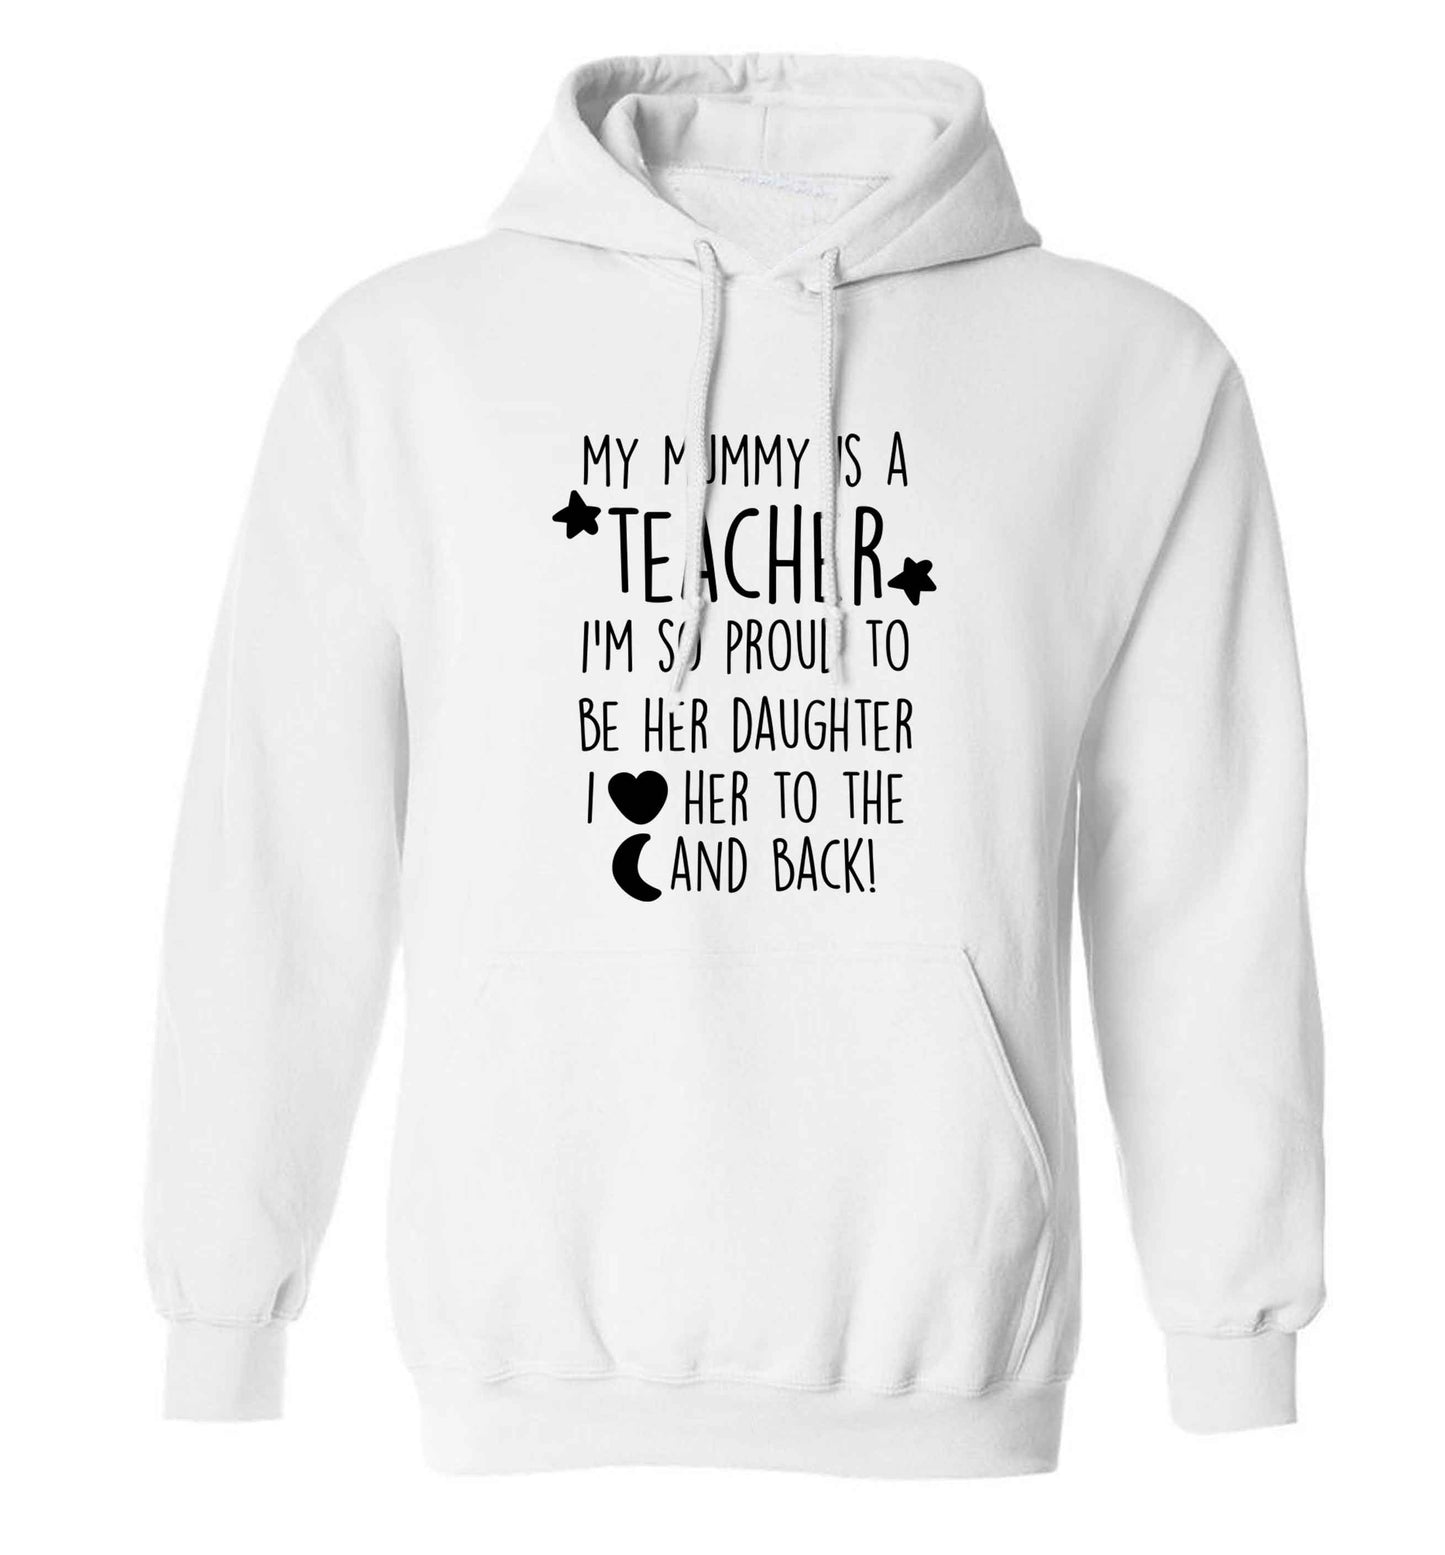 My mummy is a teacher I'm so proud to be her daughter I love her to the moon and back adults unisex white hoodie 2XL